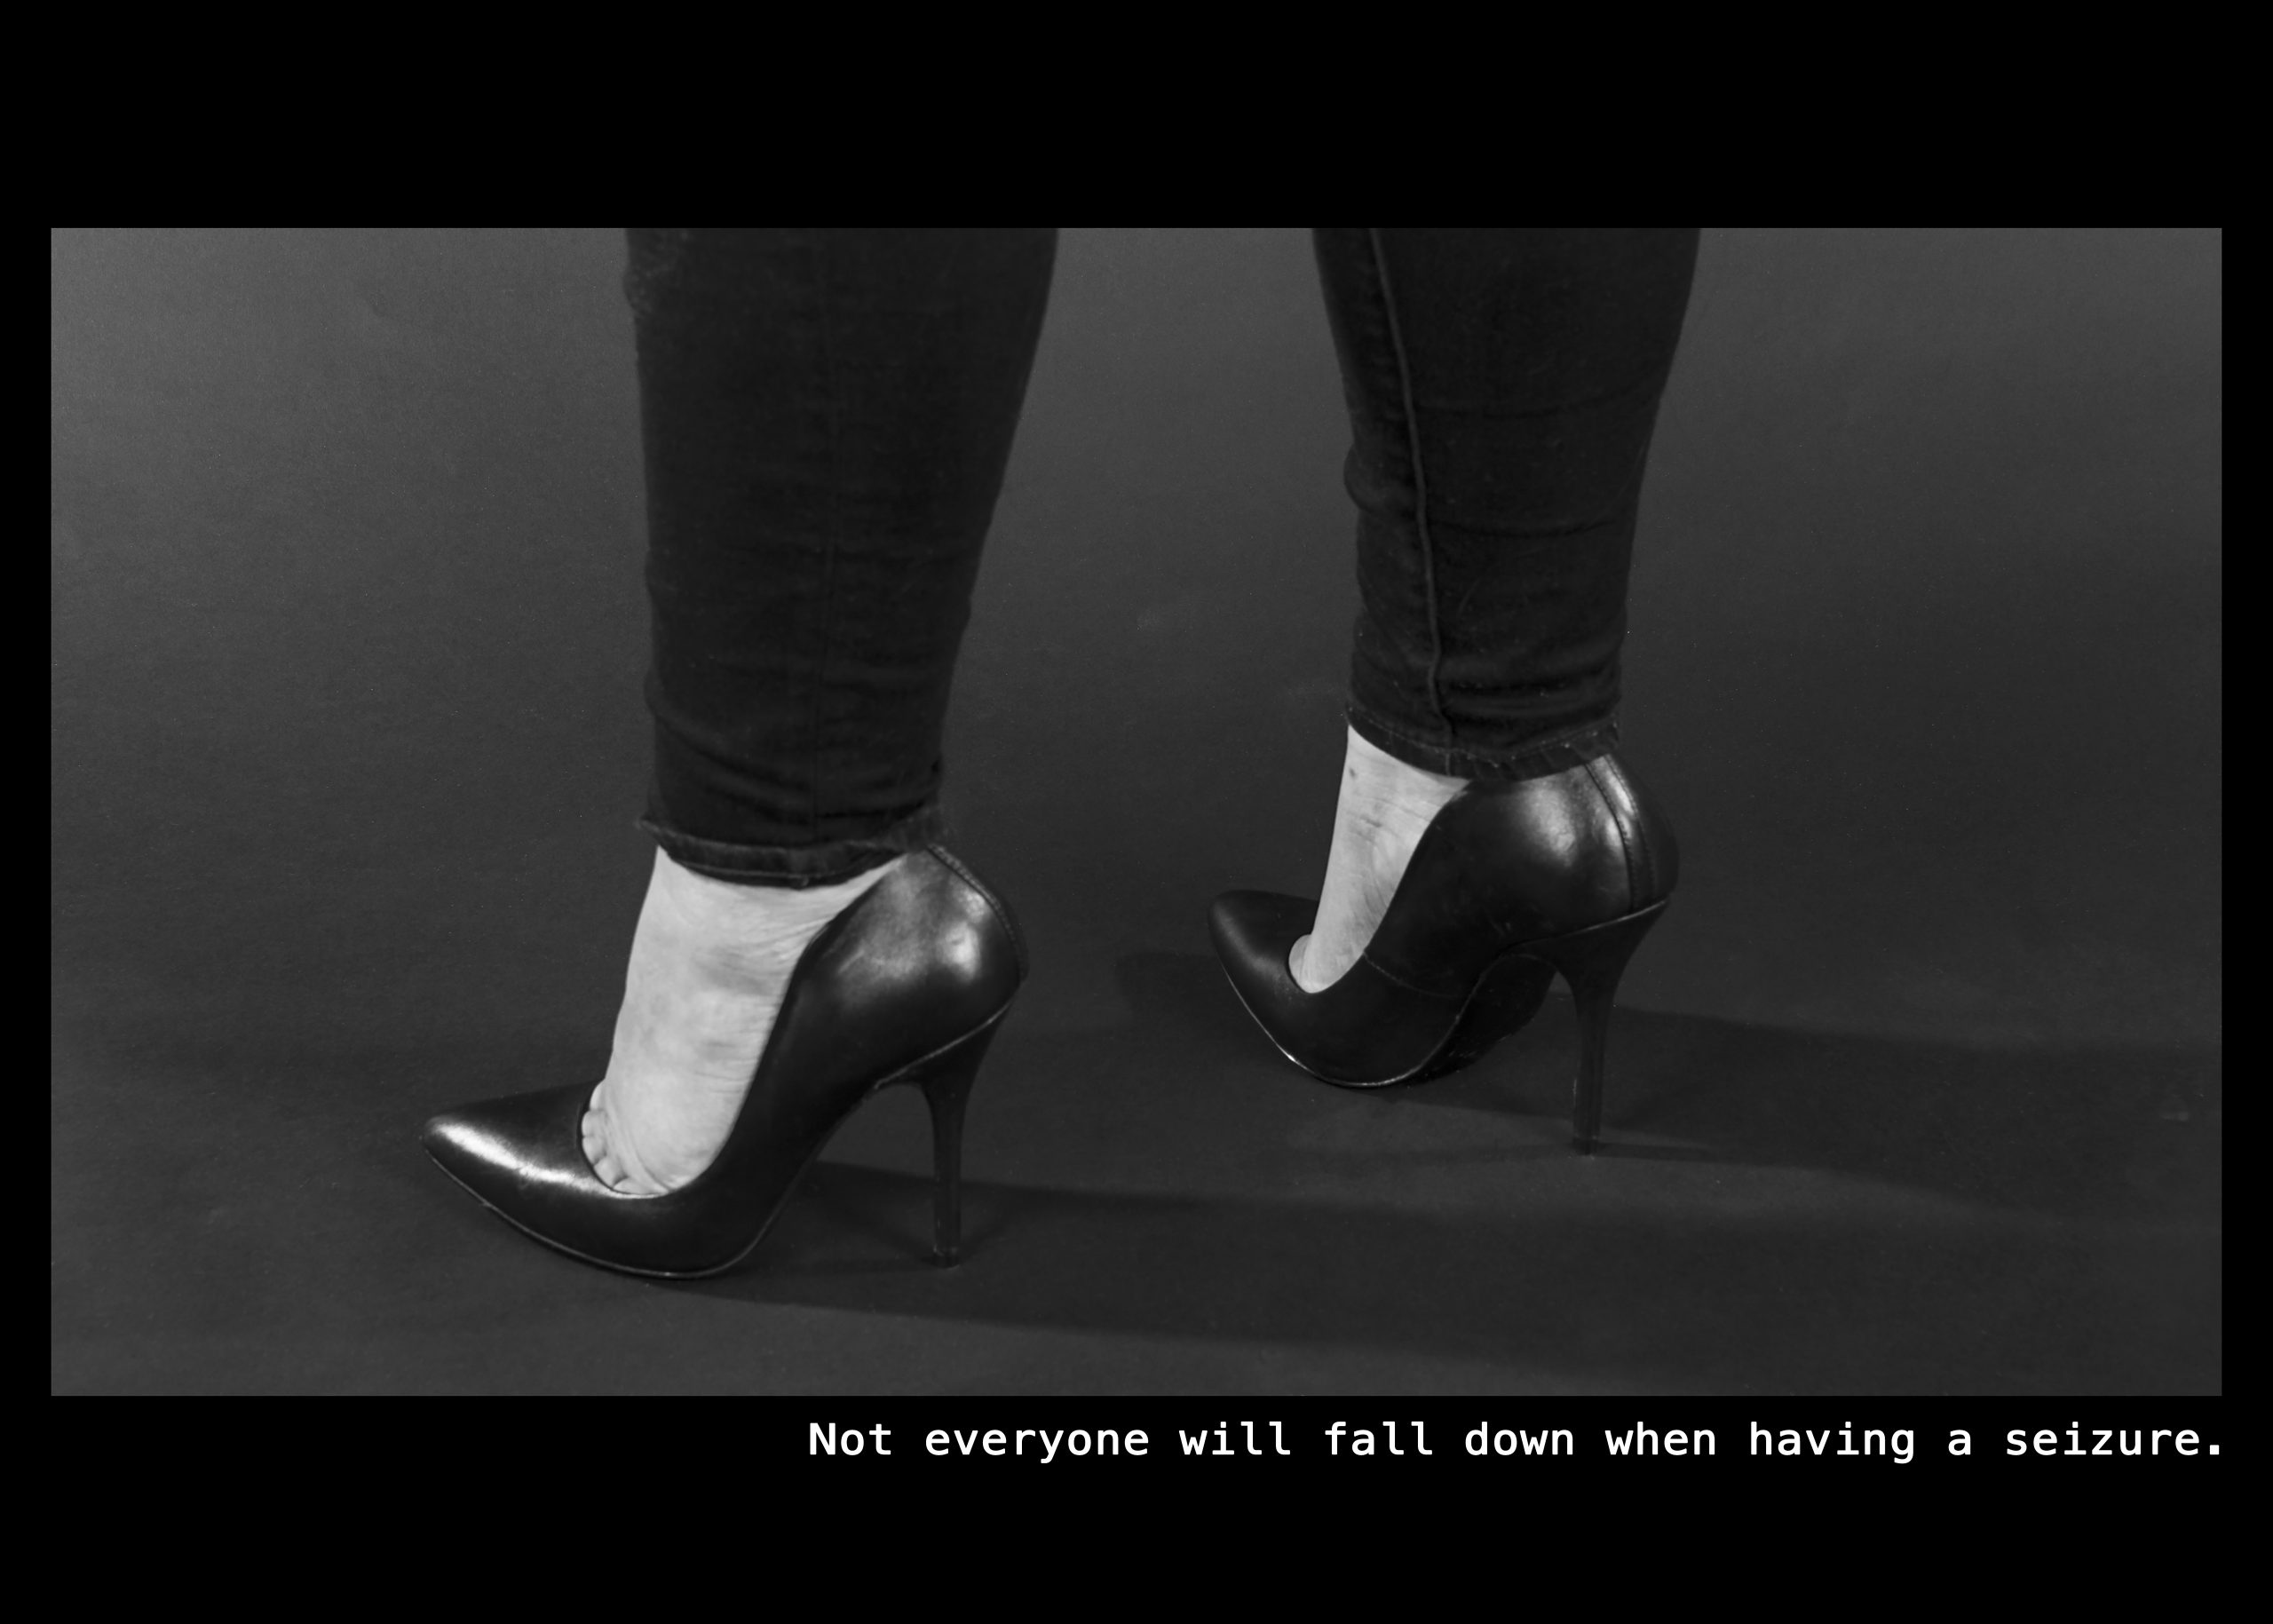 Image of a woman wearing high heels. Text: Not everyone will fall down when having a seizure.